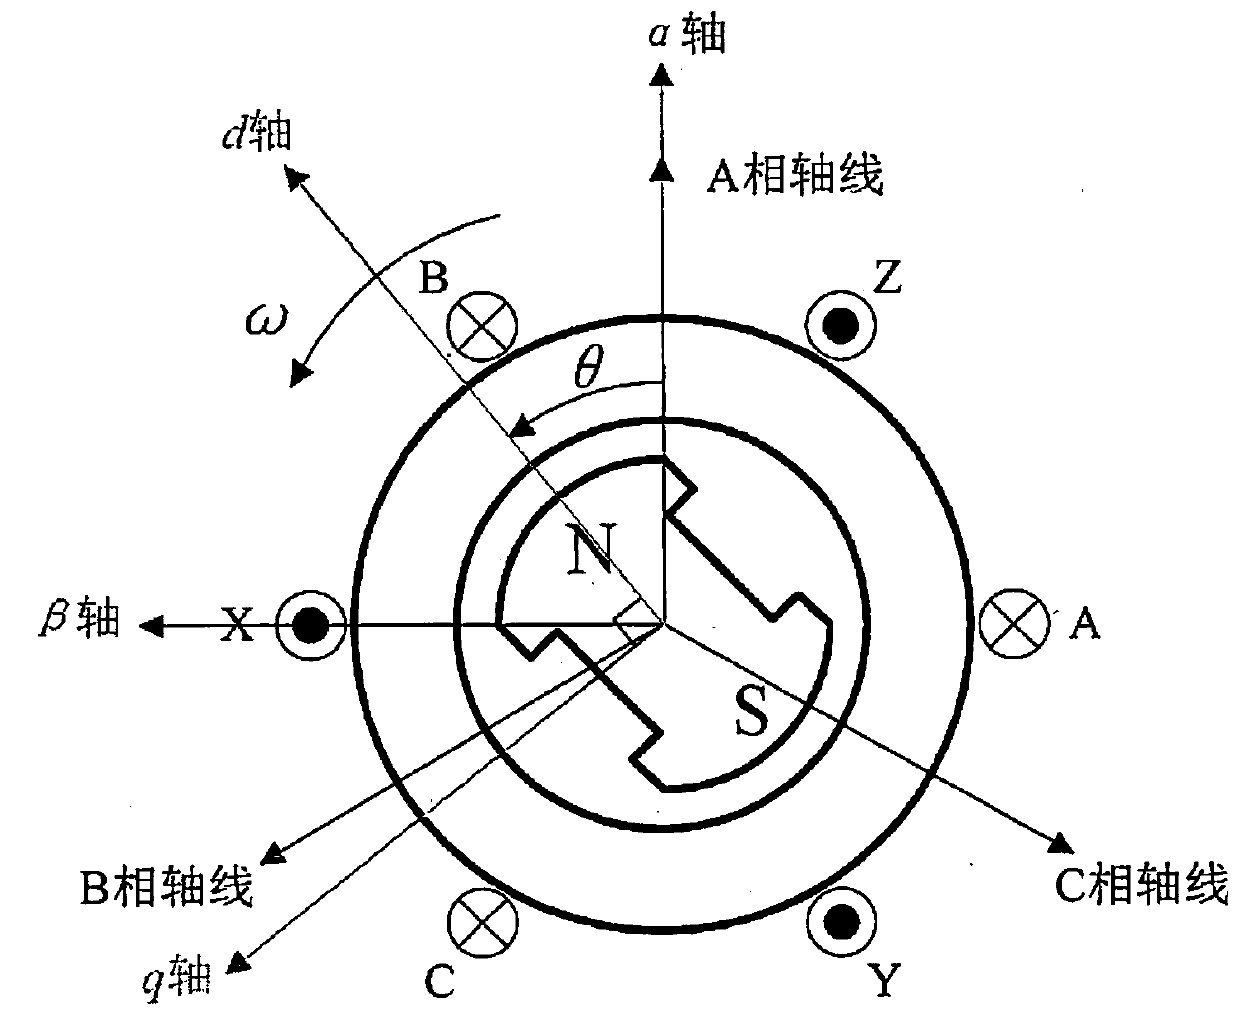 Ultra-low-speed high-precision positioning control method of frameless torque motor